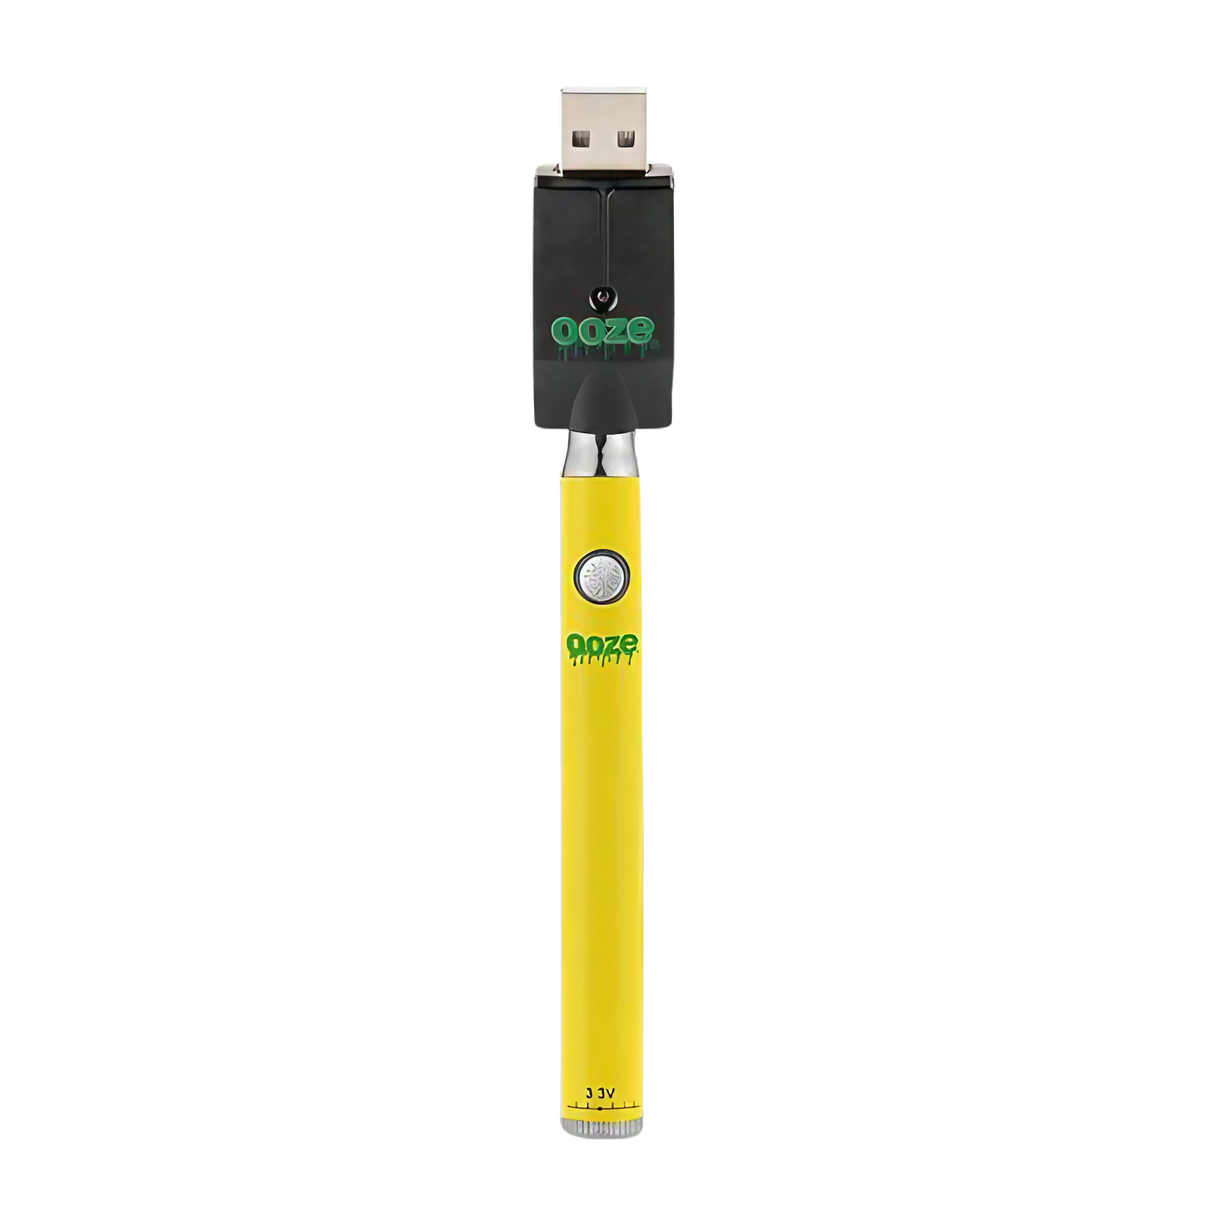 Ooze Slim Twist Battery with USB Charger in Yellow, Front View, 510 Thread for Vaporizers